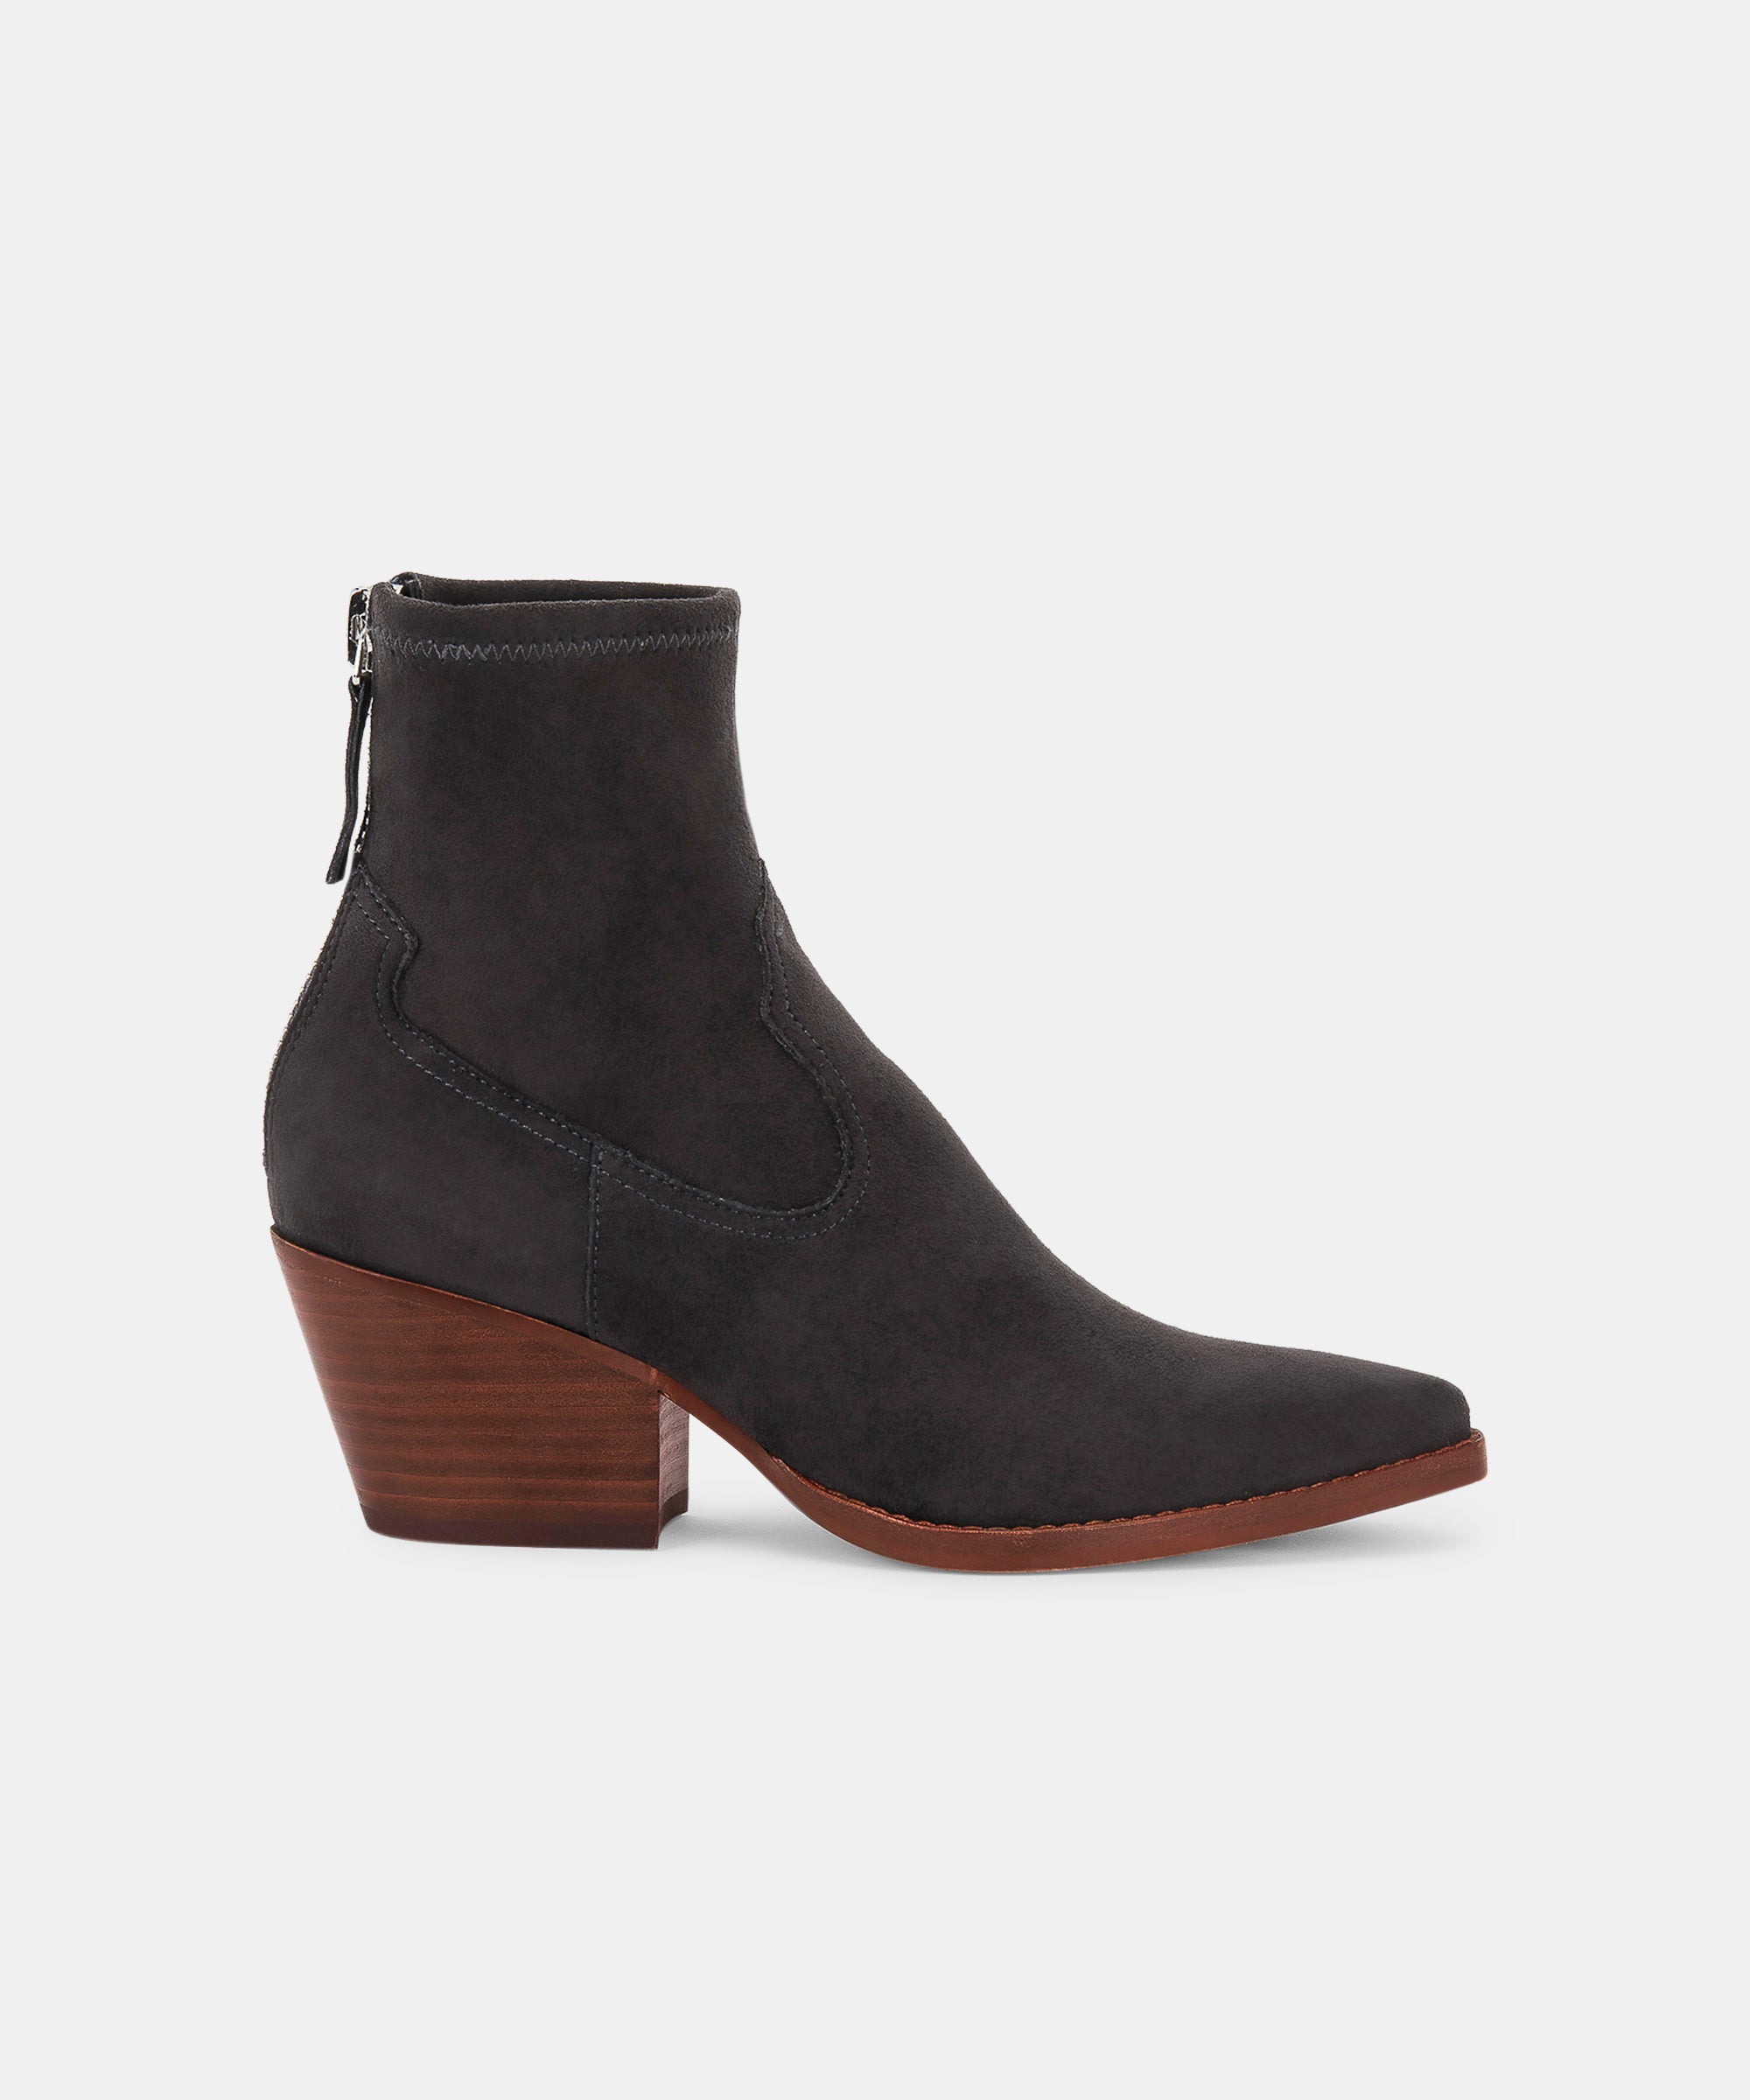 dolce vita anthracite booties